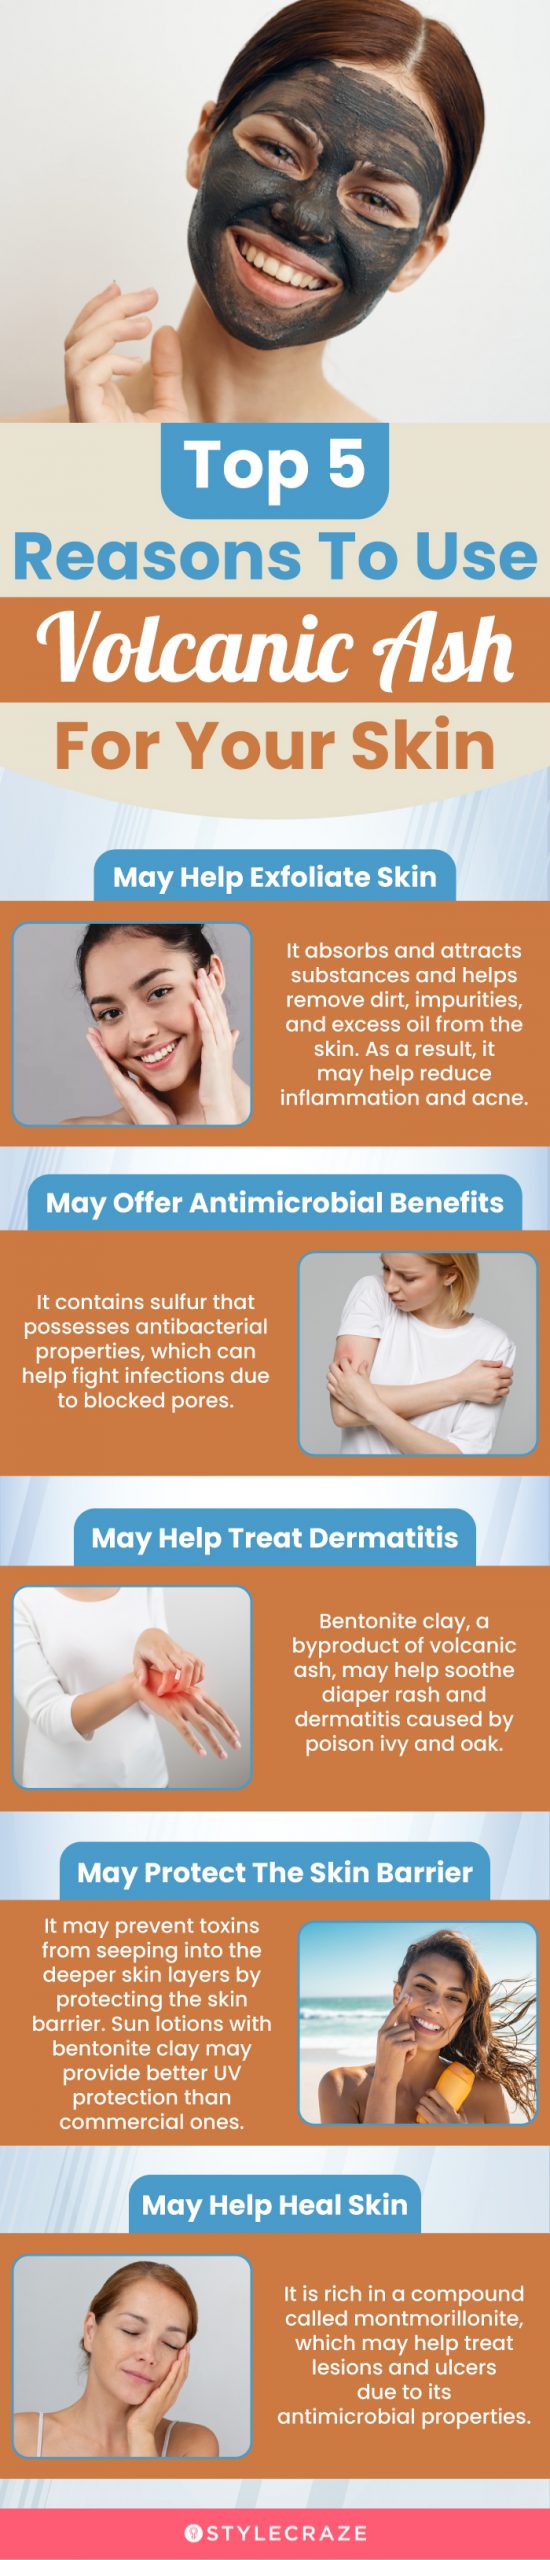 top 5 reasons to use volcanic ash for your skin (infographic)